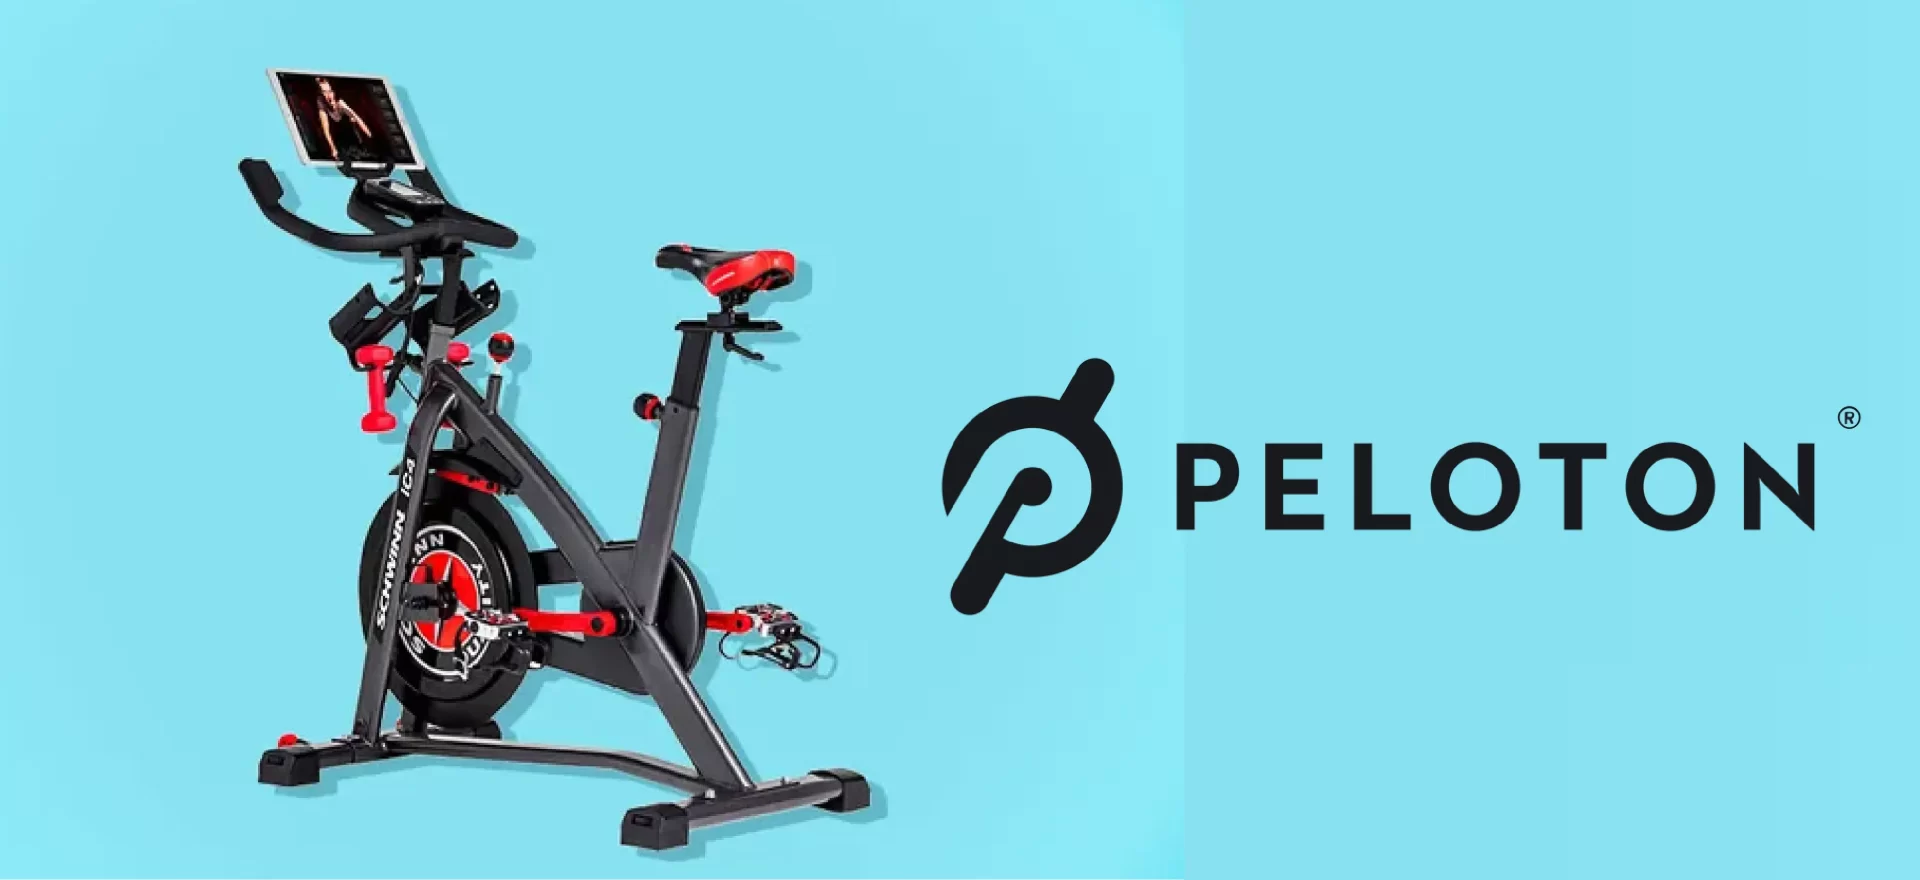 How To Connect Bowflex C6 To The Peloton App